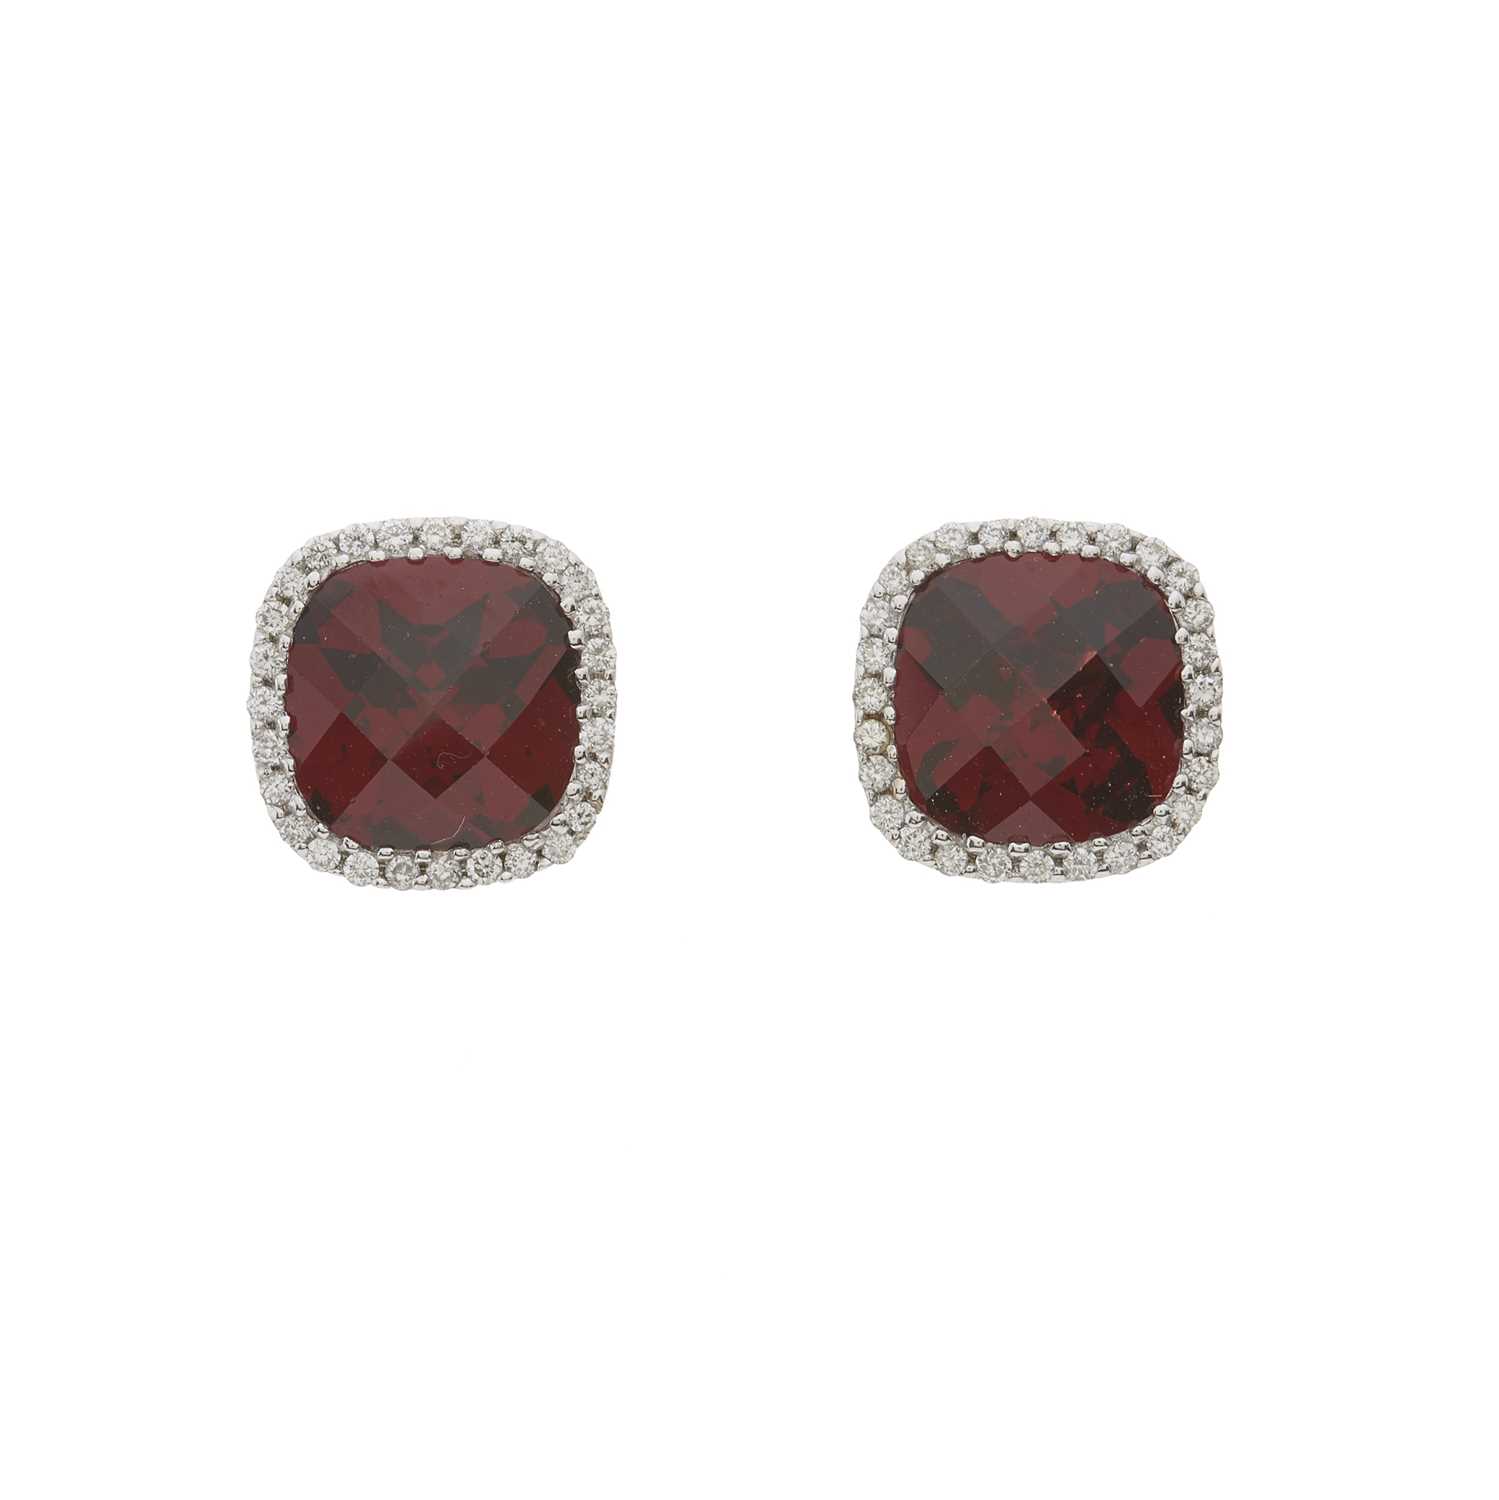 A pair of 18ct gold garnet and diamond cluster stud earrings